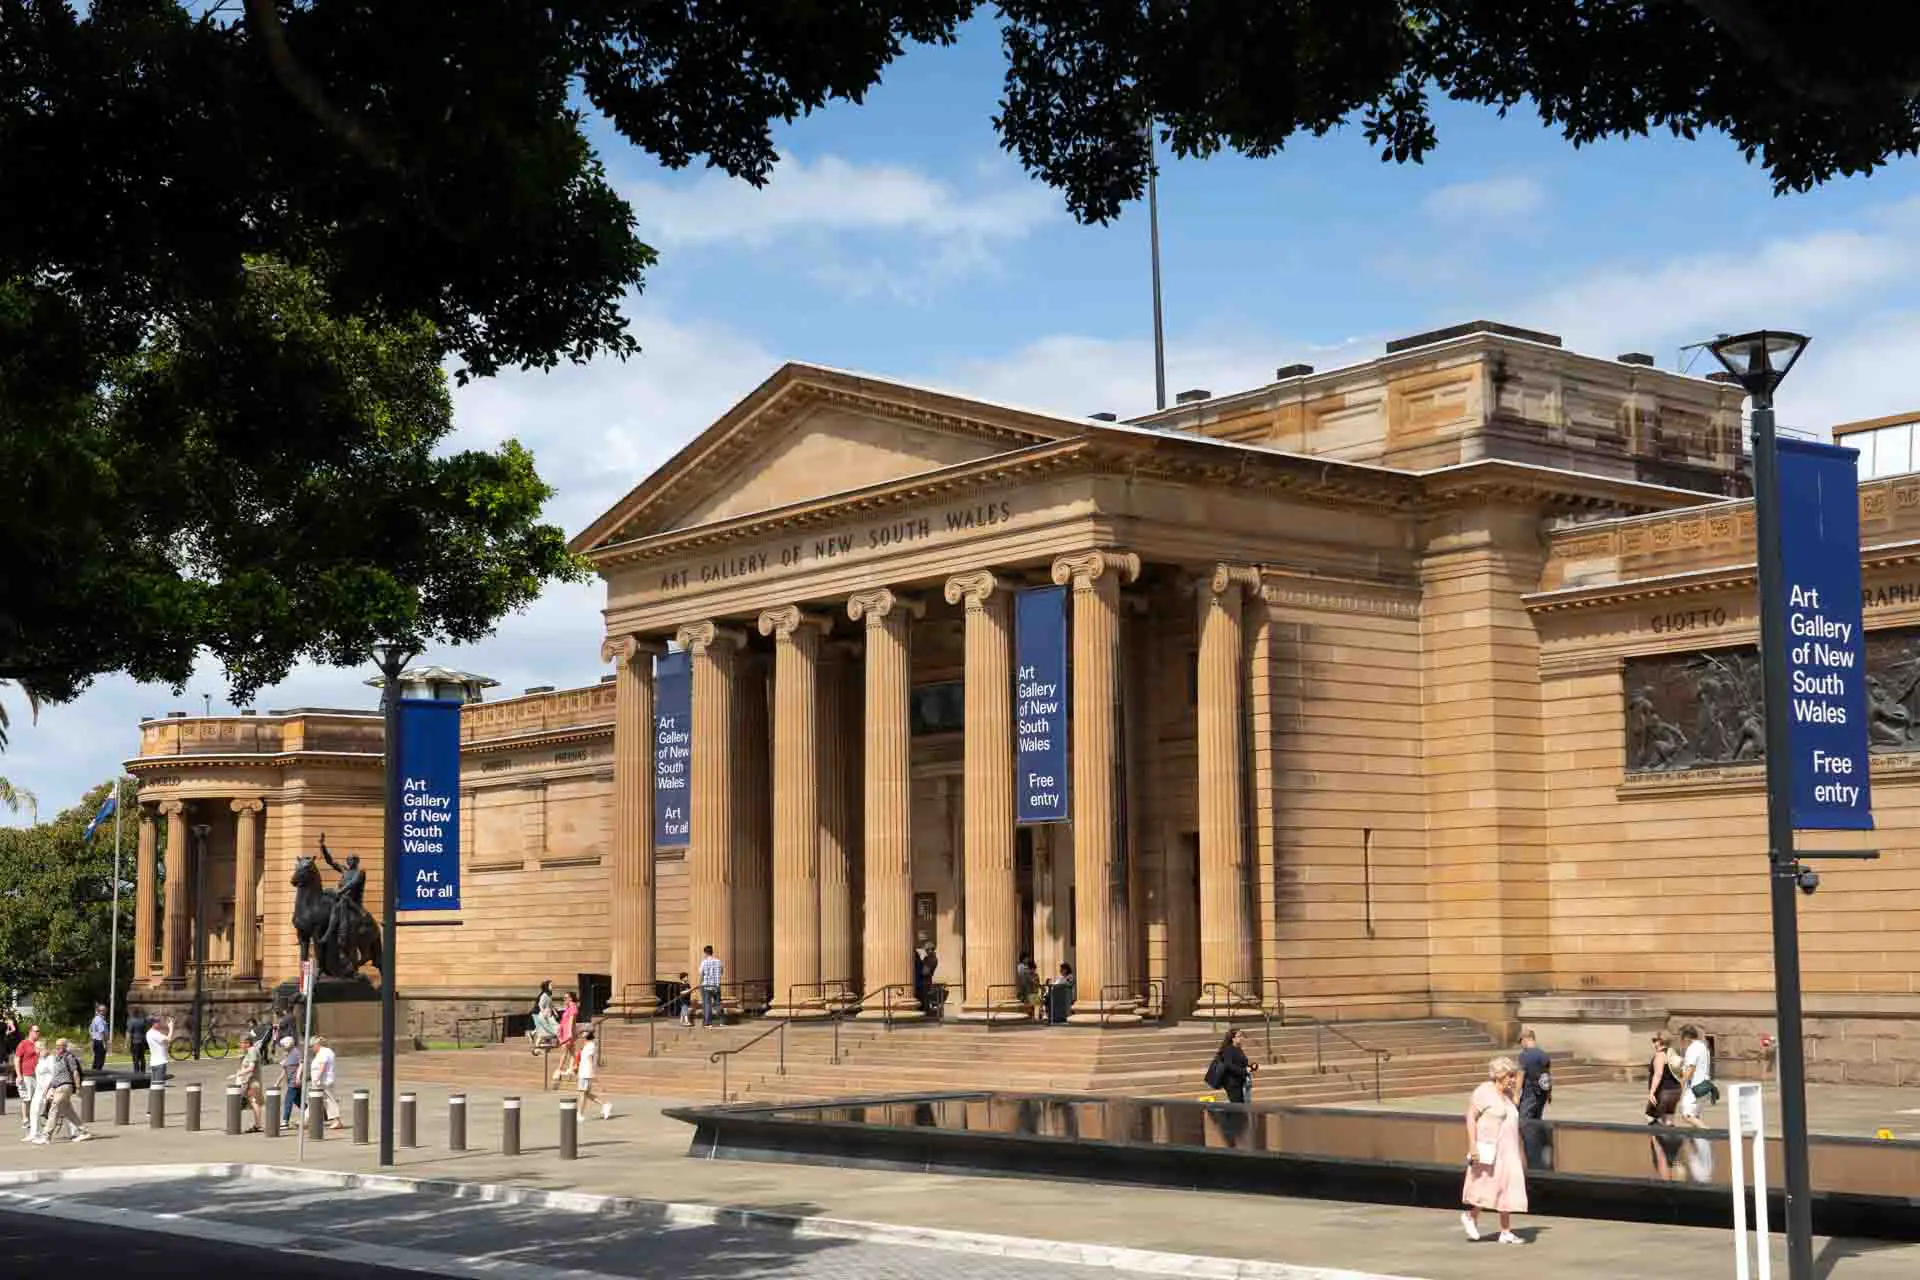 Front facade of Neoclassical building with blue banners reading "Art Gallery of New South Wales"